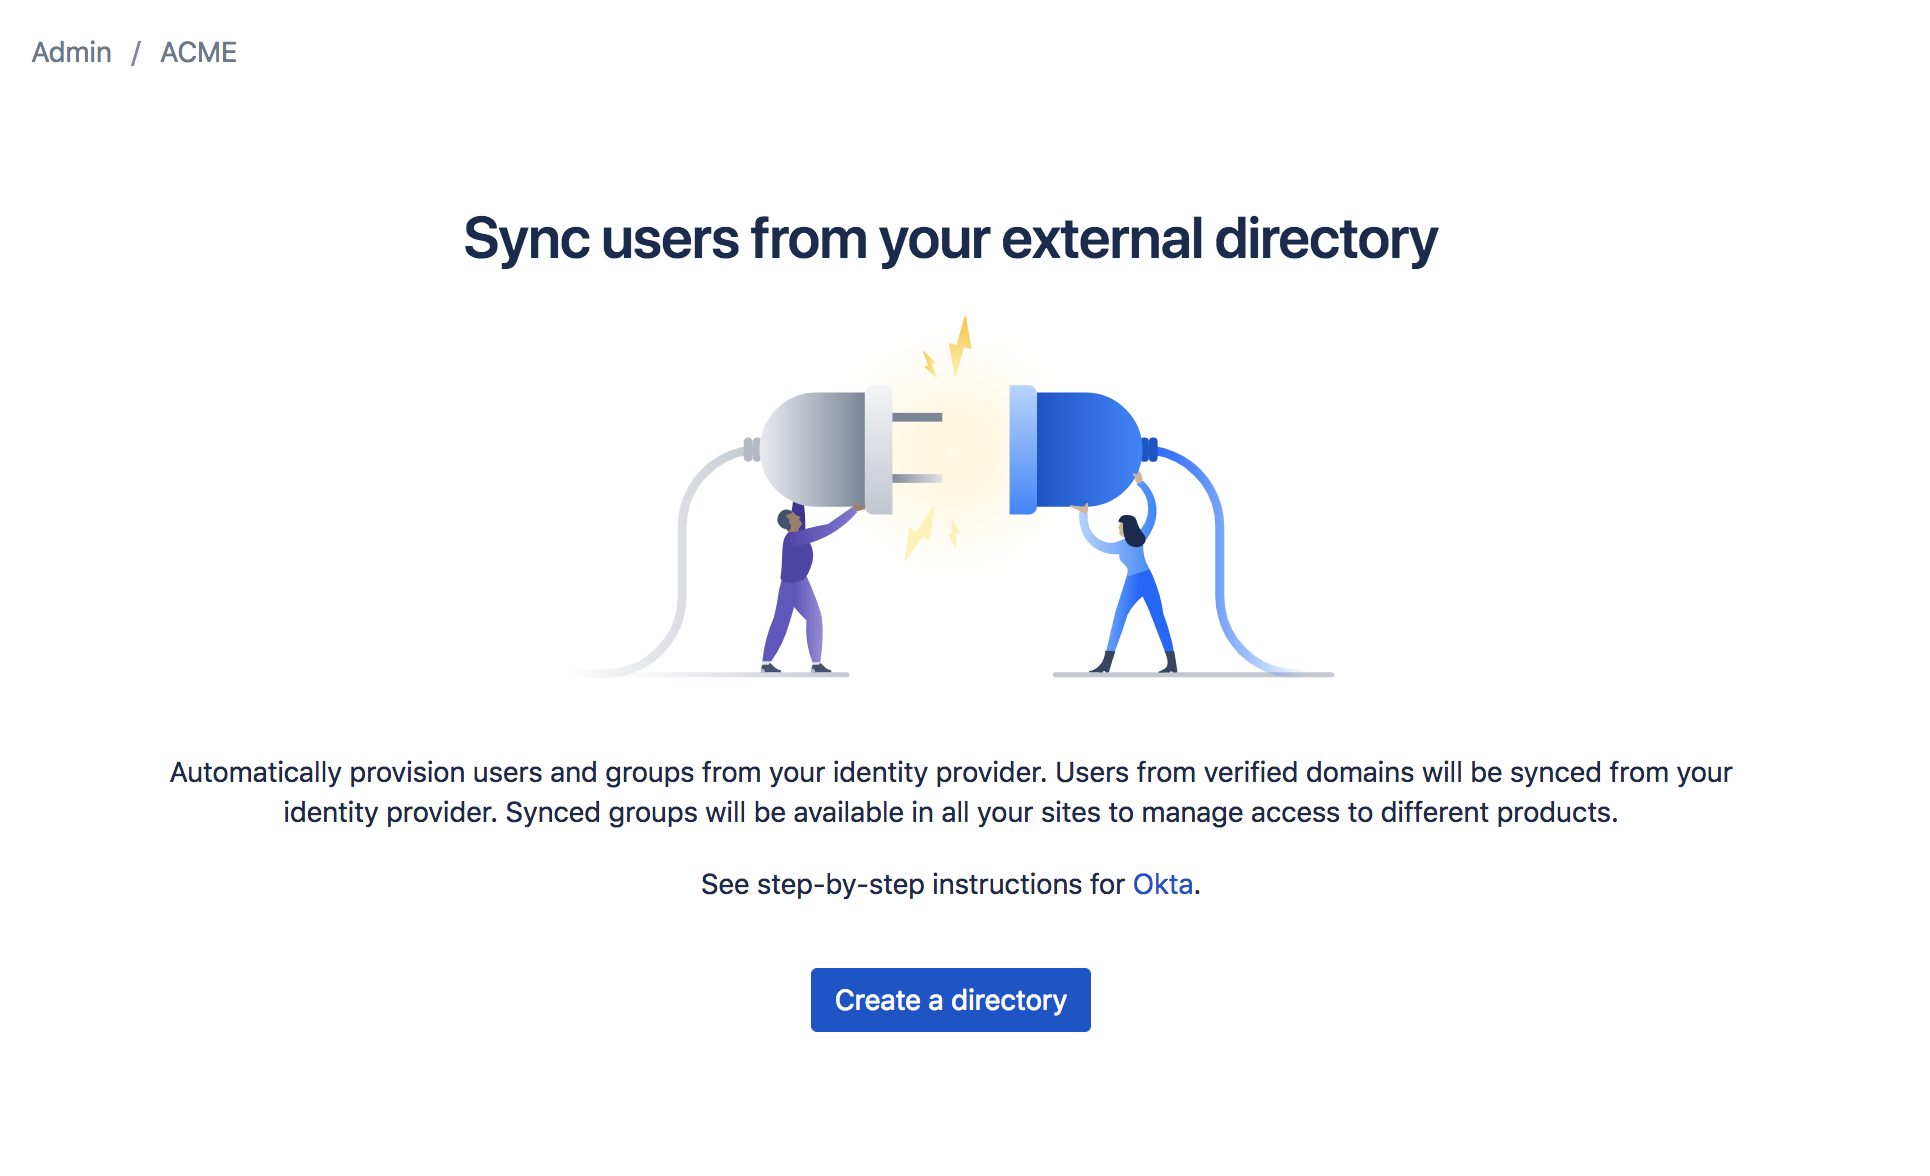 A screenshot of Sync users from your external directory with a Create a directory button